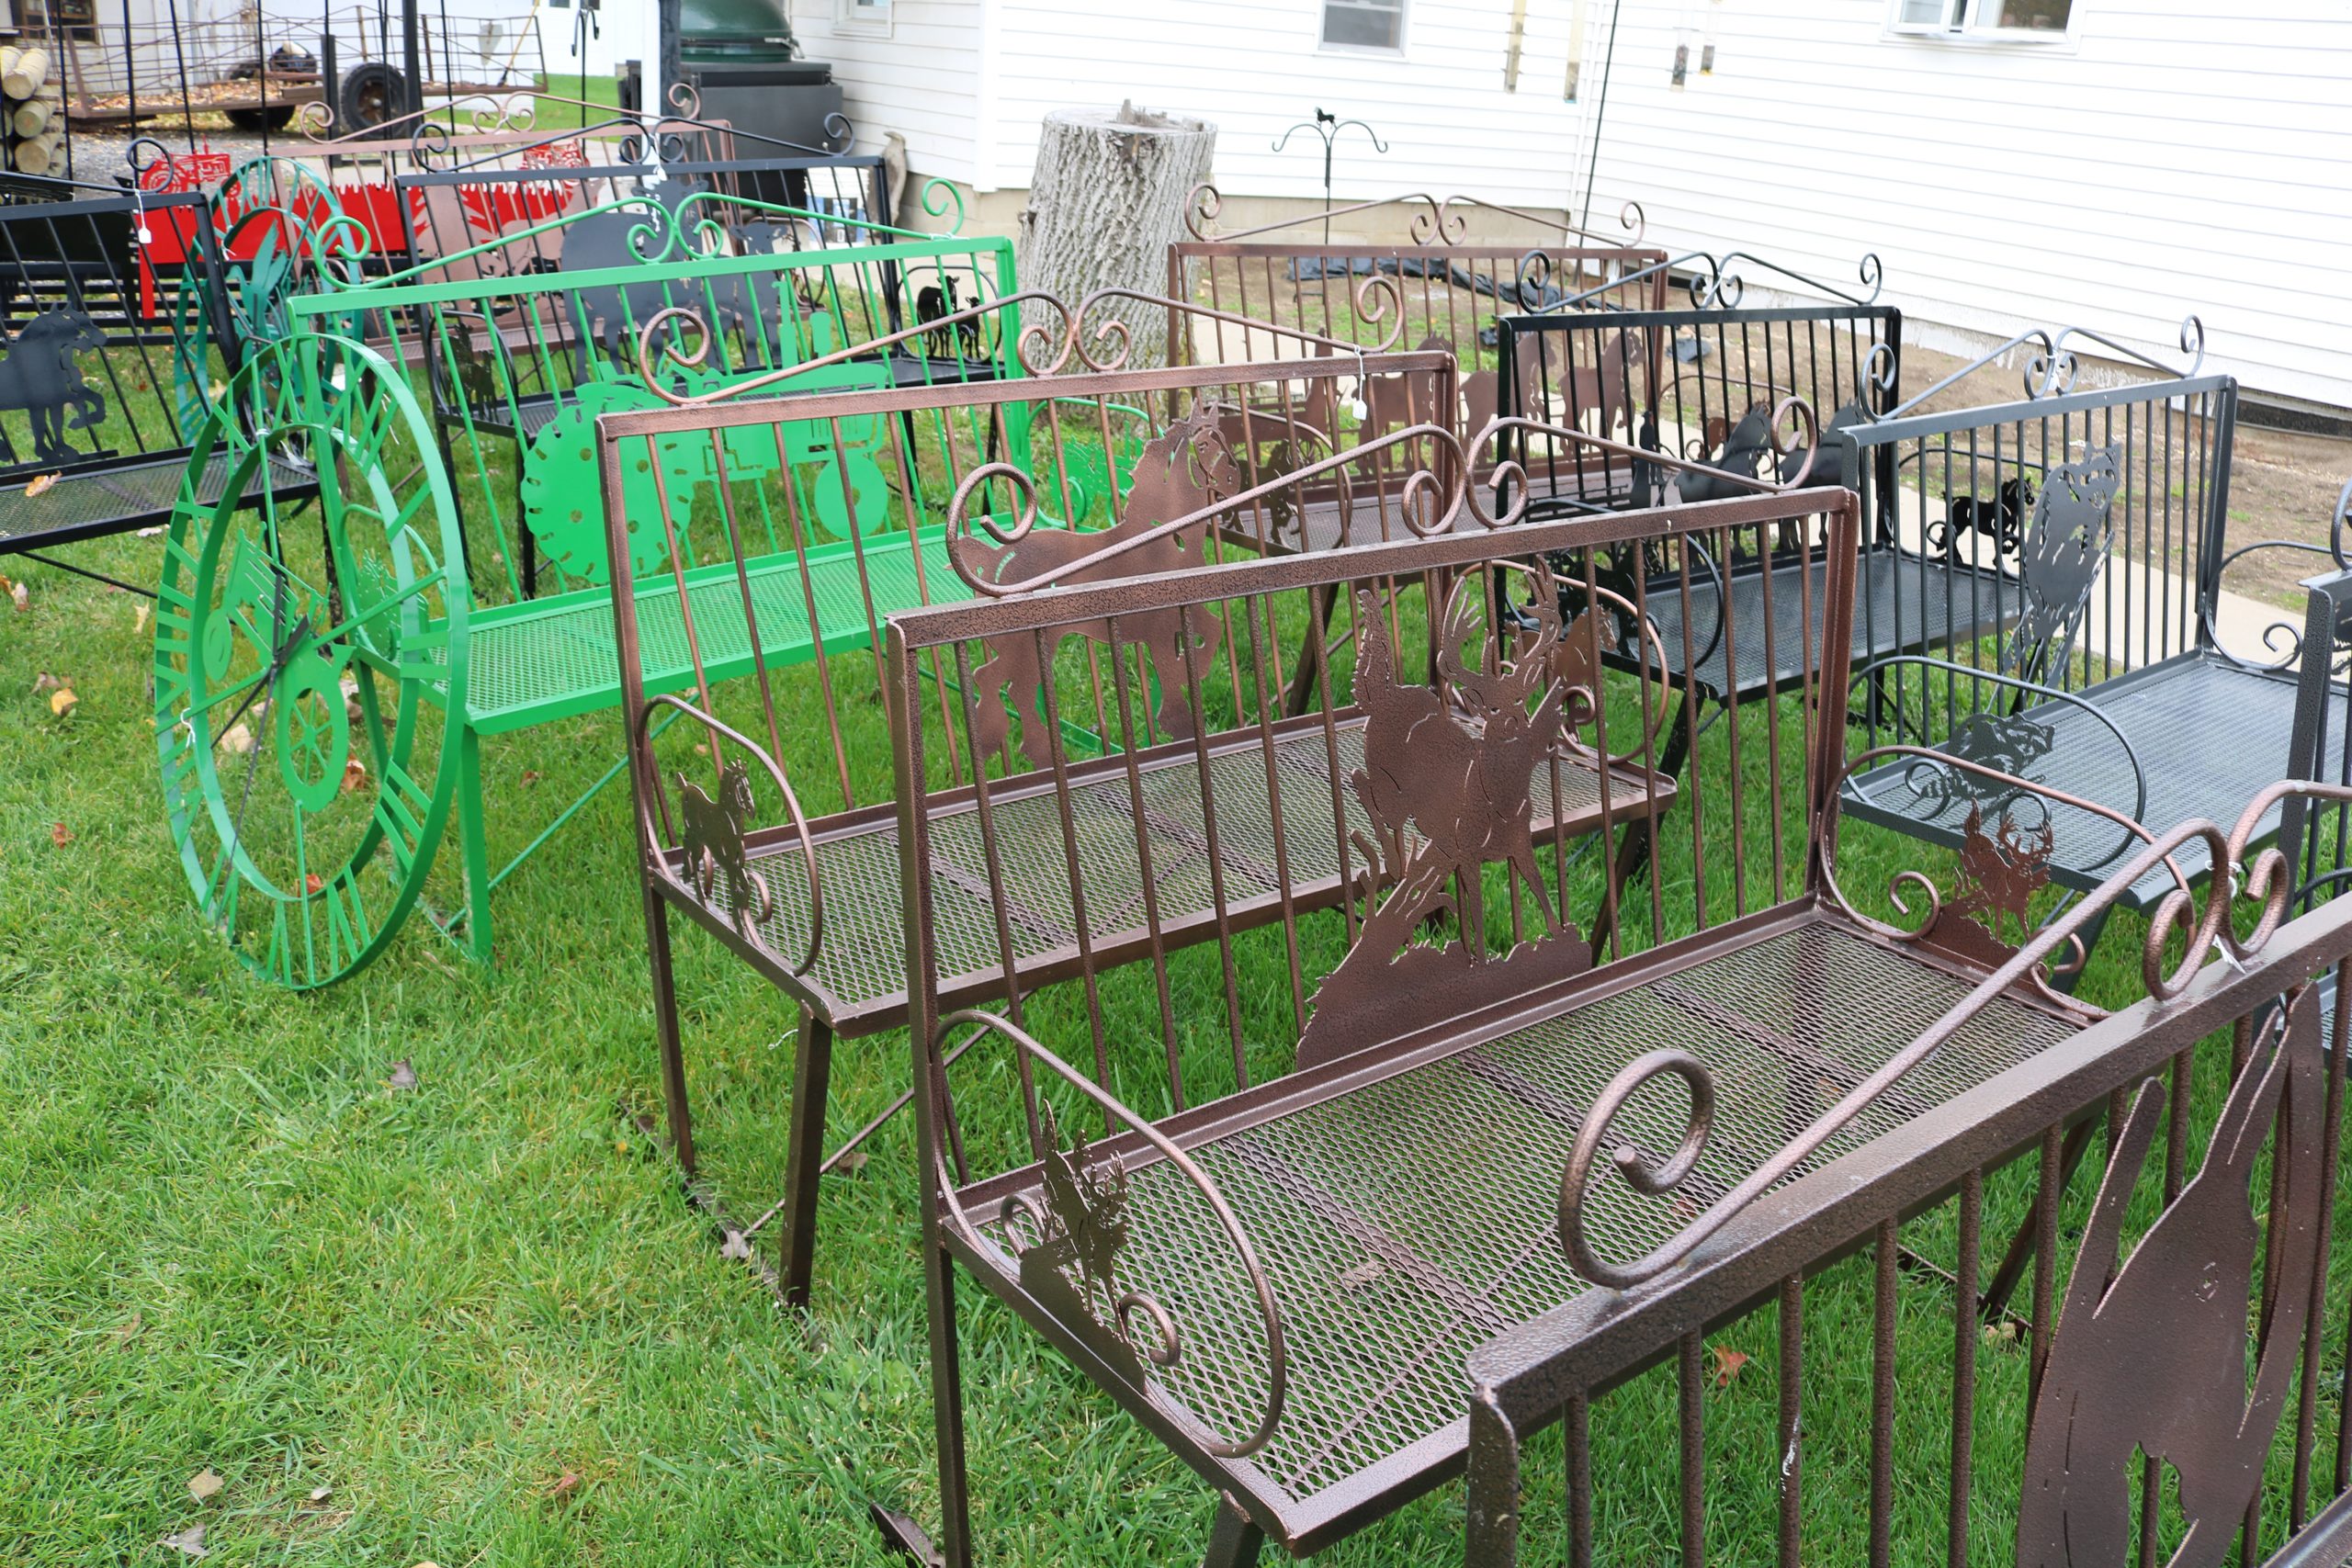 Handmade wrought iron items from Countryside Creations